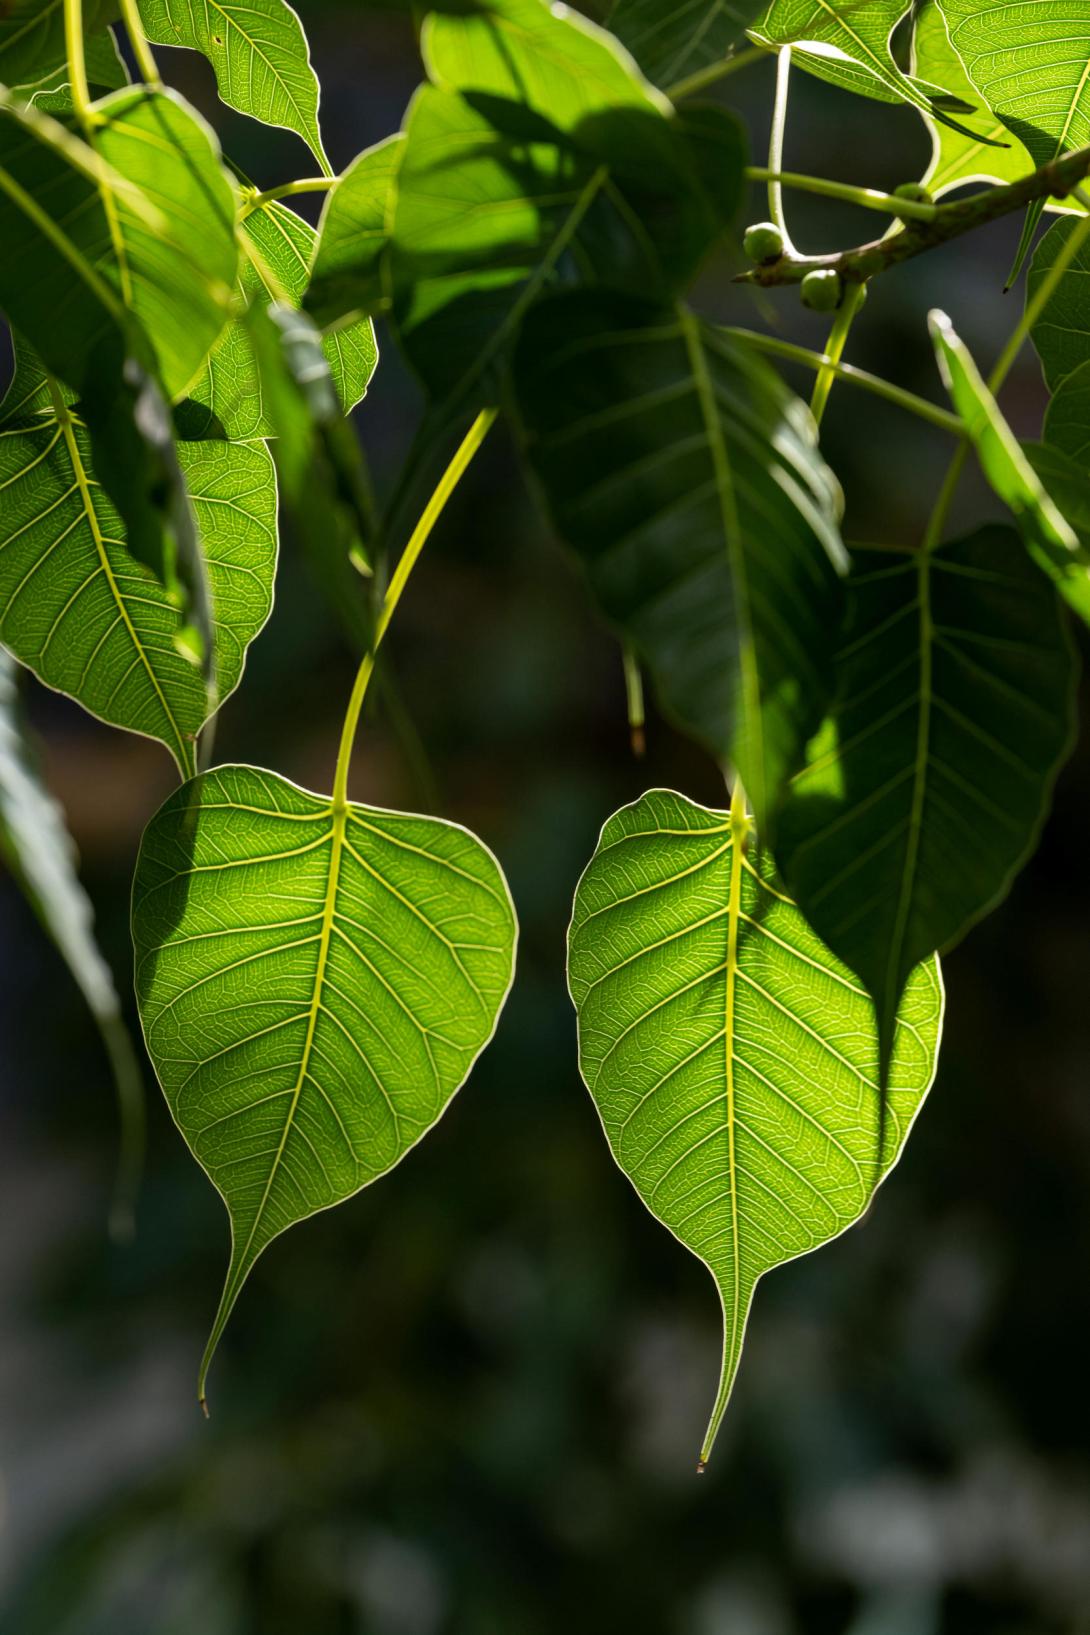 A close up of green tree leaves with light behind them.